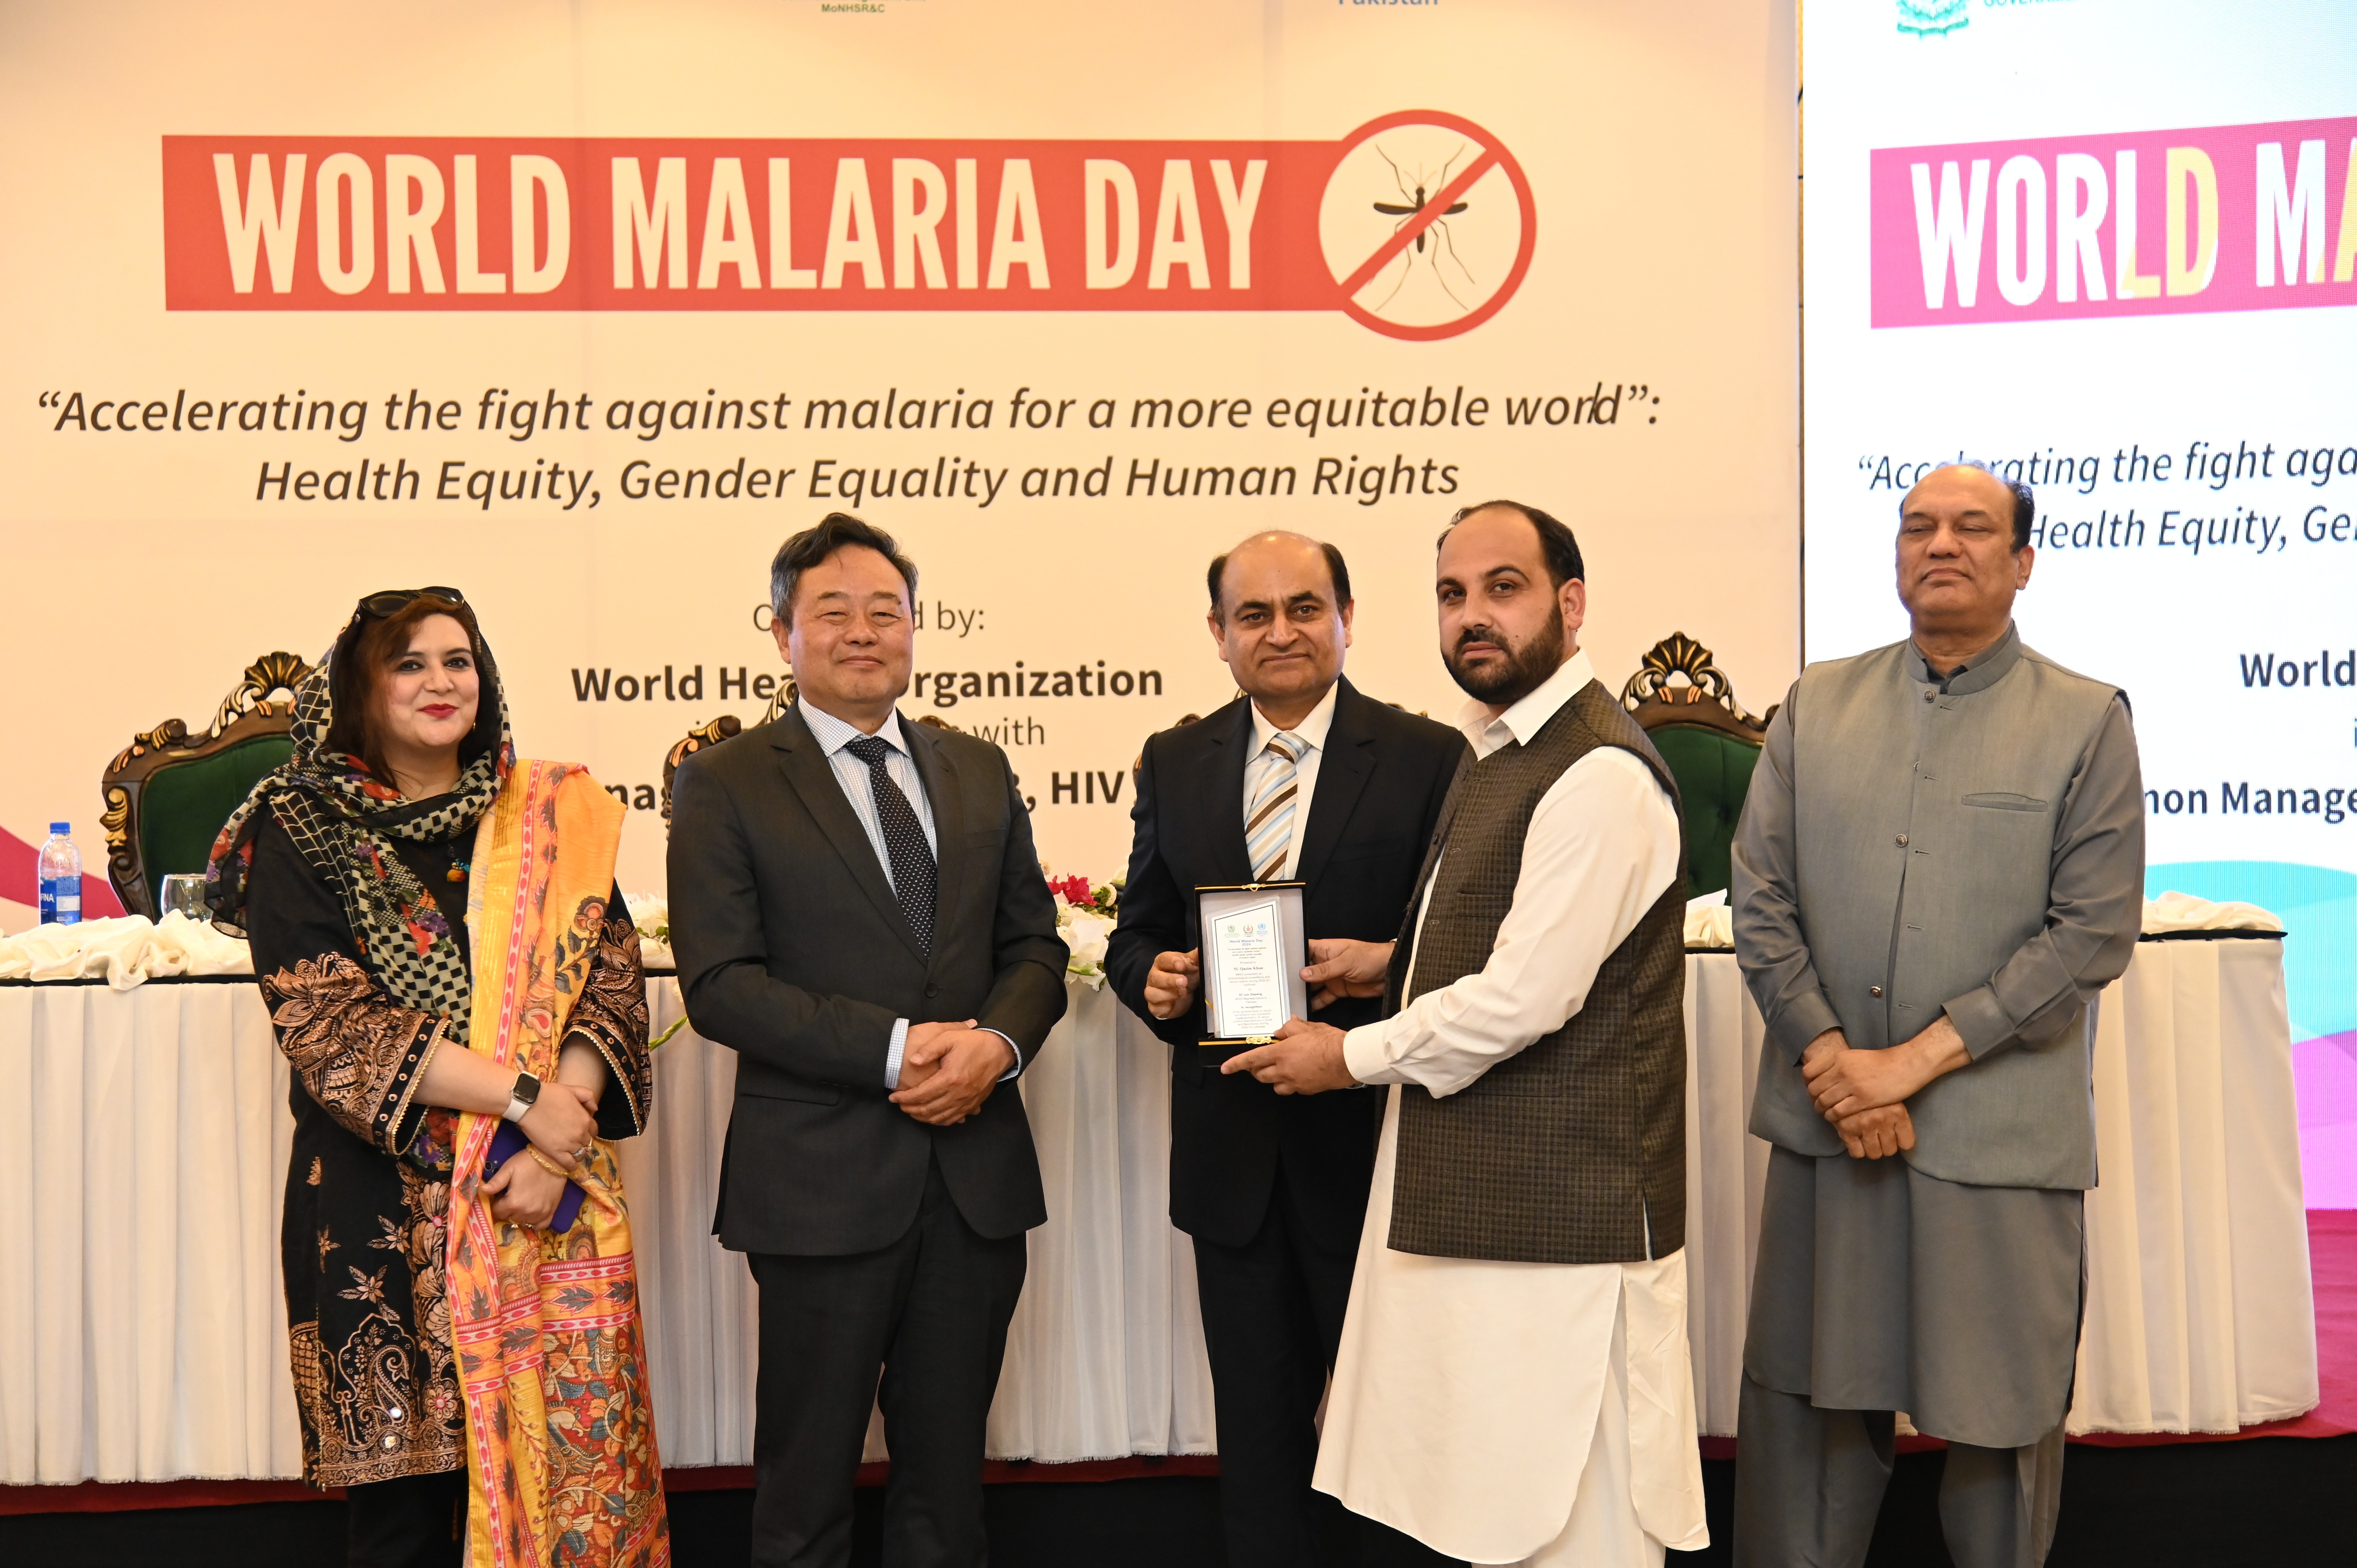 The shield distribution at the event of World Malaria Day 2032